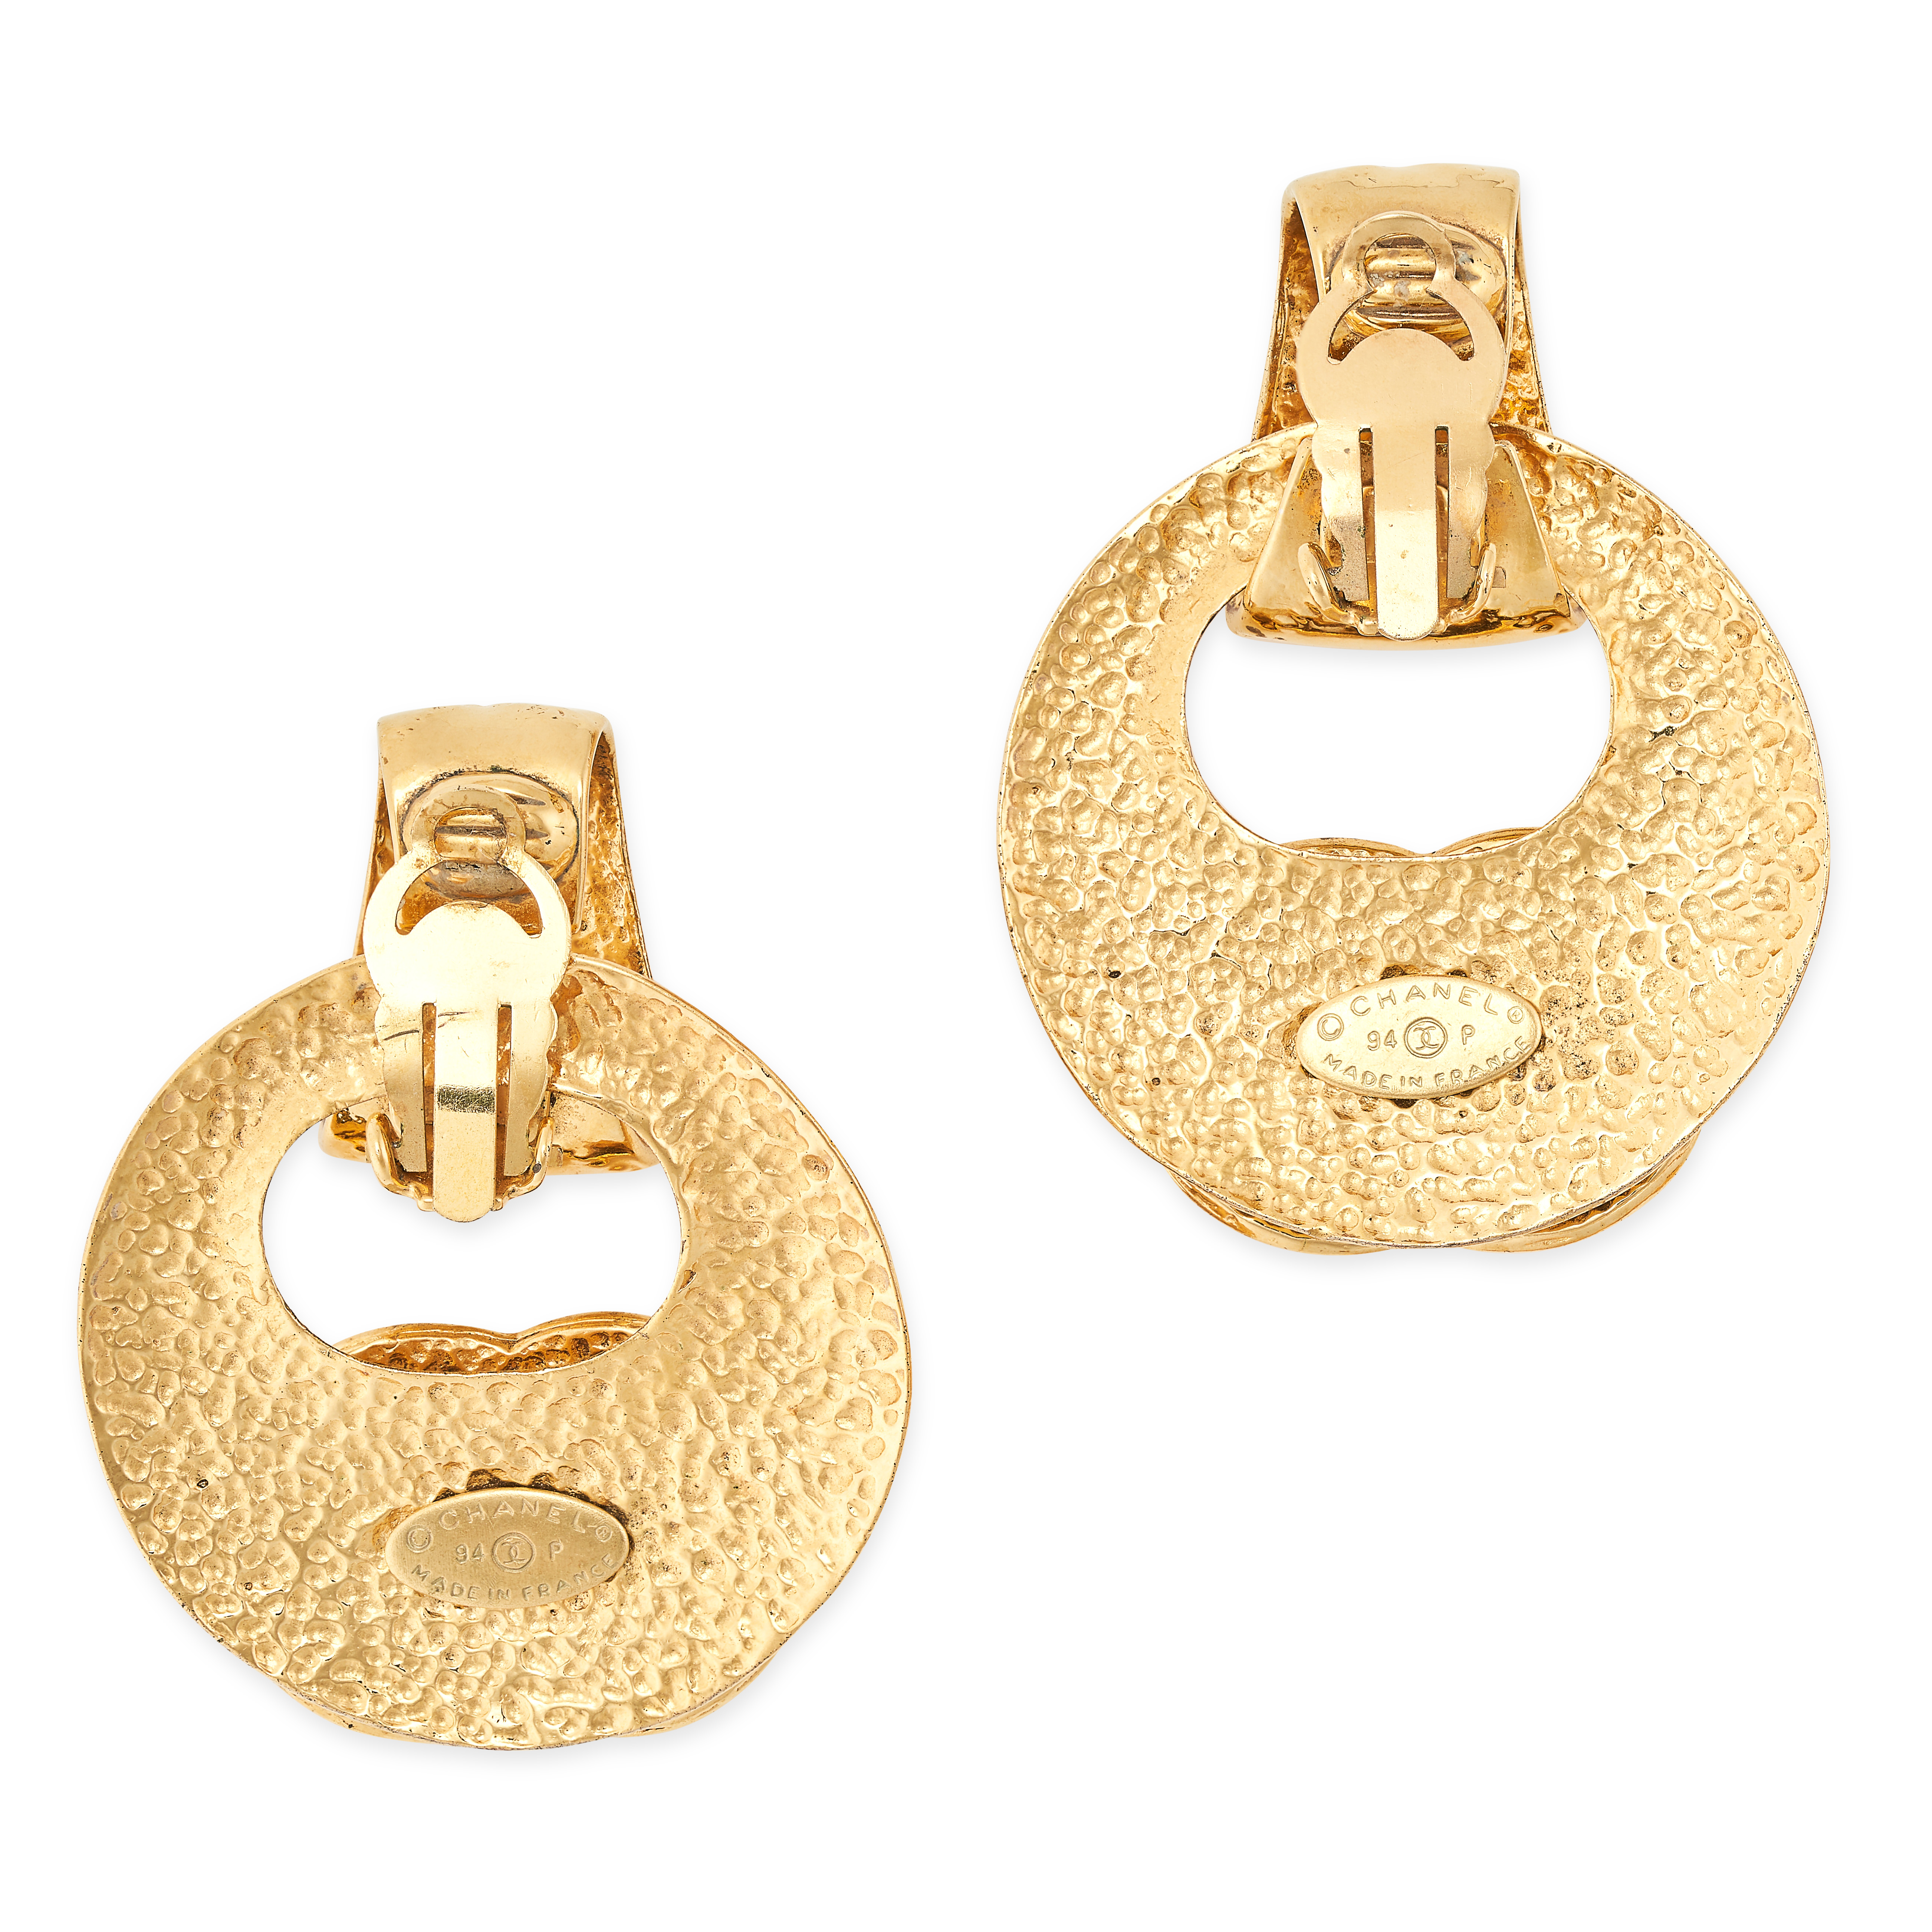 CHANEL, A PAIR OF VINTAGE CC HOOP EARRINGS each in quilted design with two interlocking C motifs, - Image 3 of 3